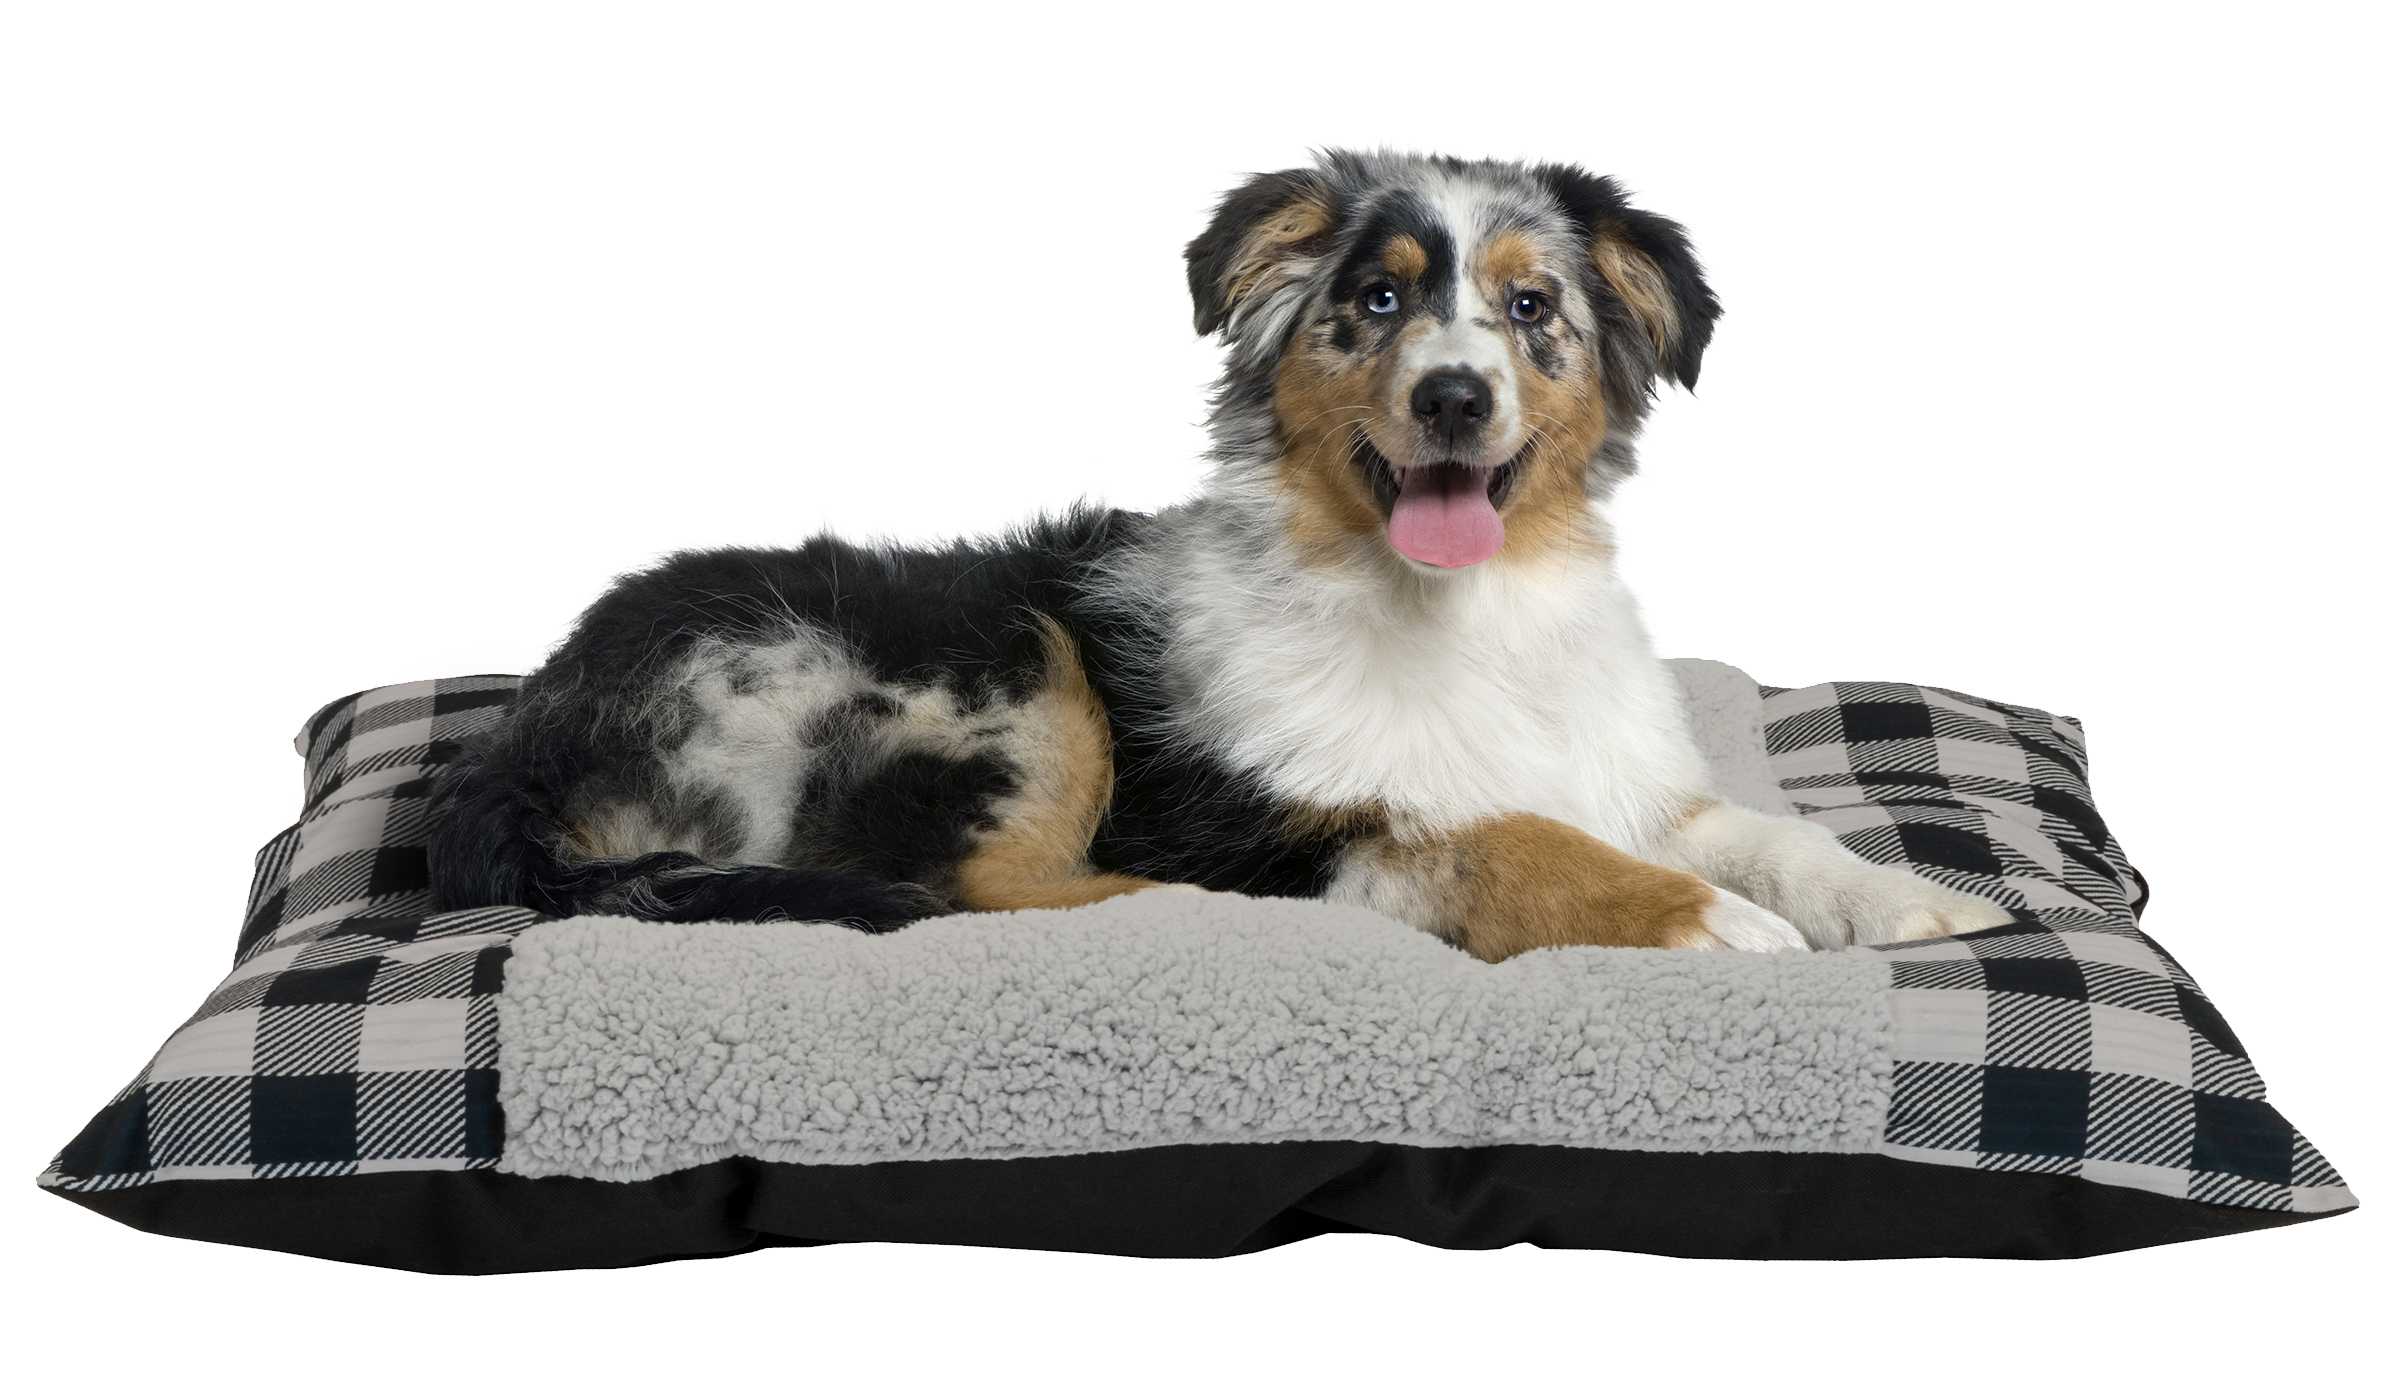 Holiday Time Plush Plaid Pet Bed, Gray, 27"L x 36"W x 3"H - image 1 of 3